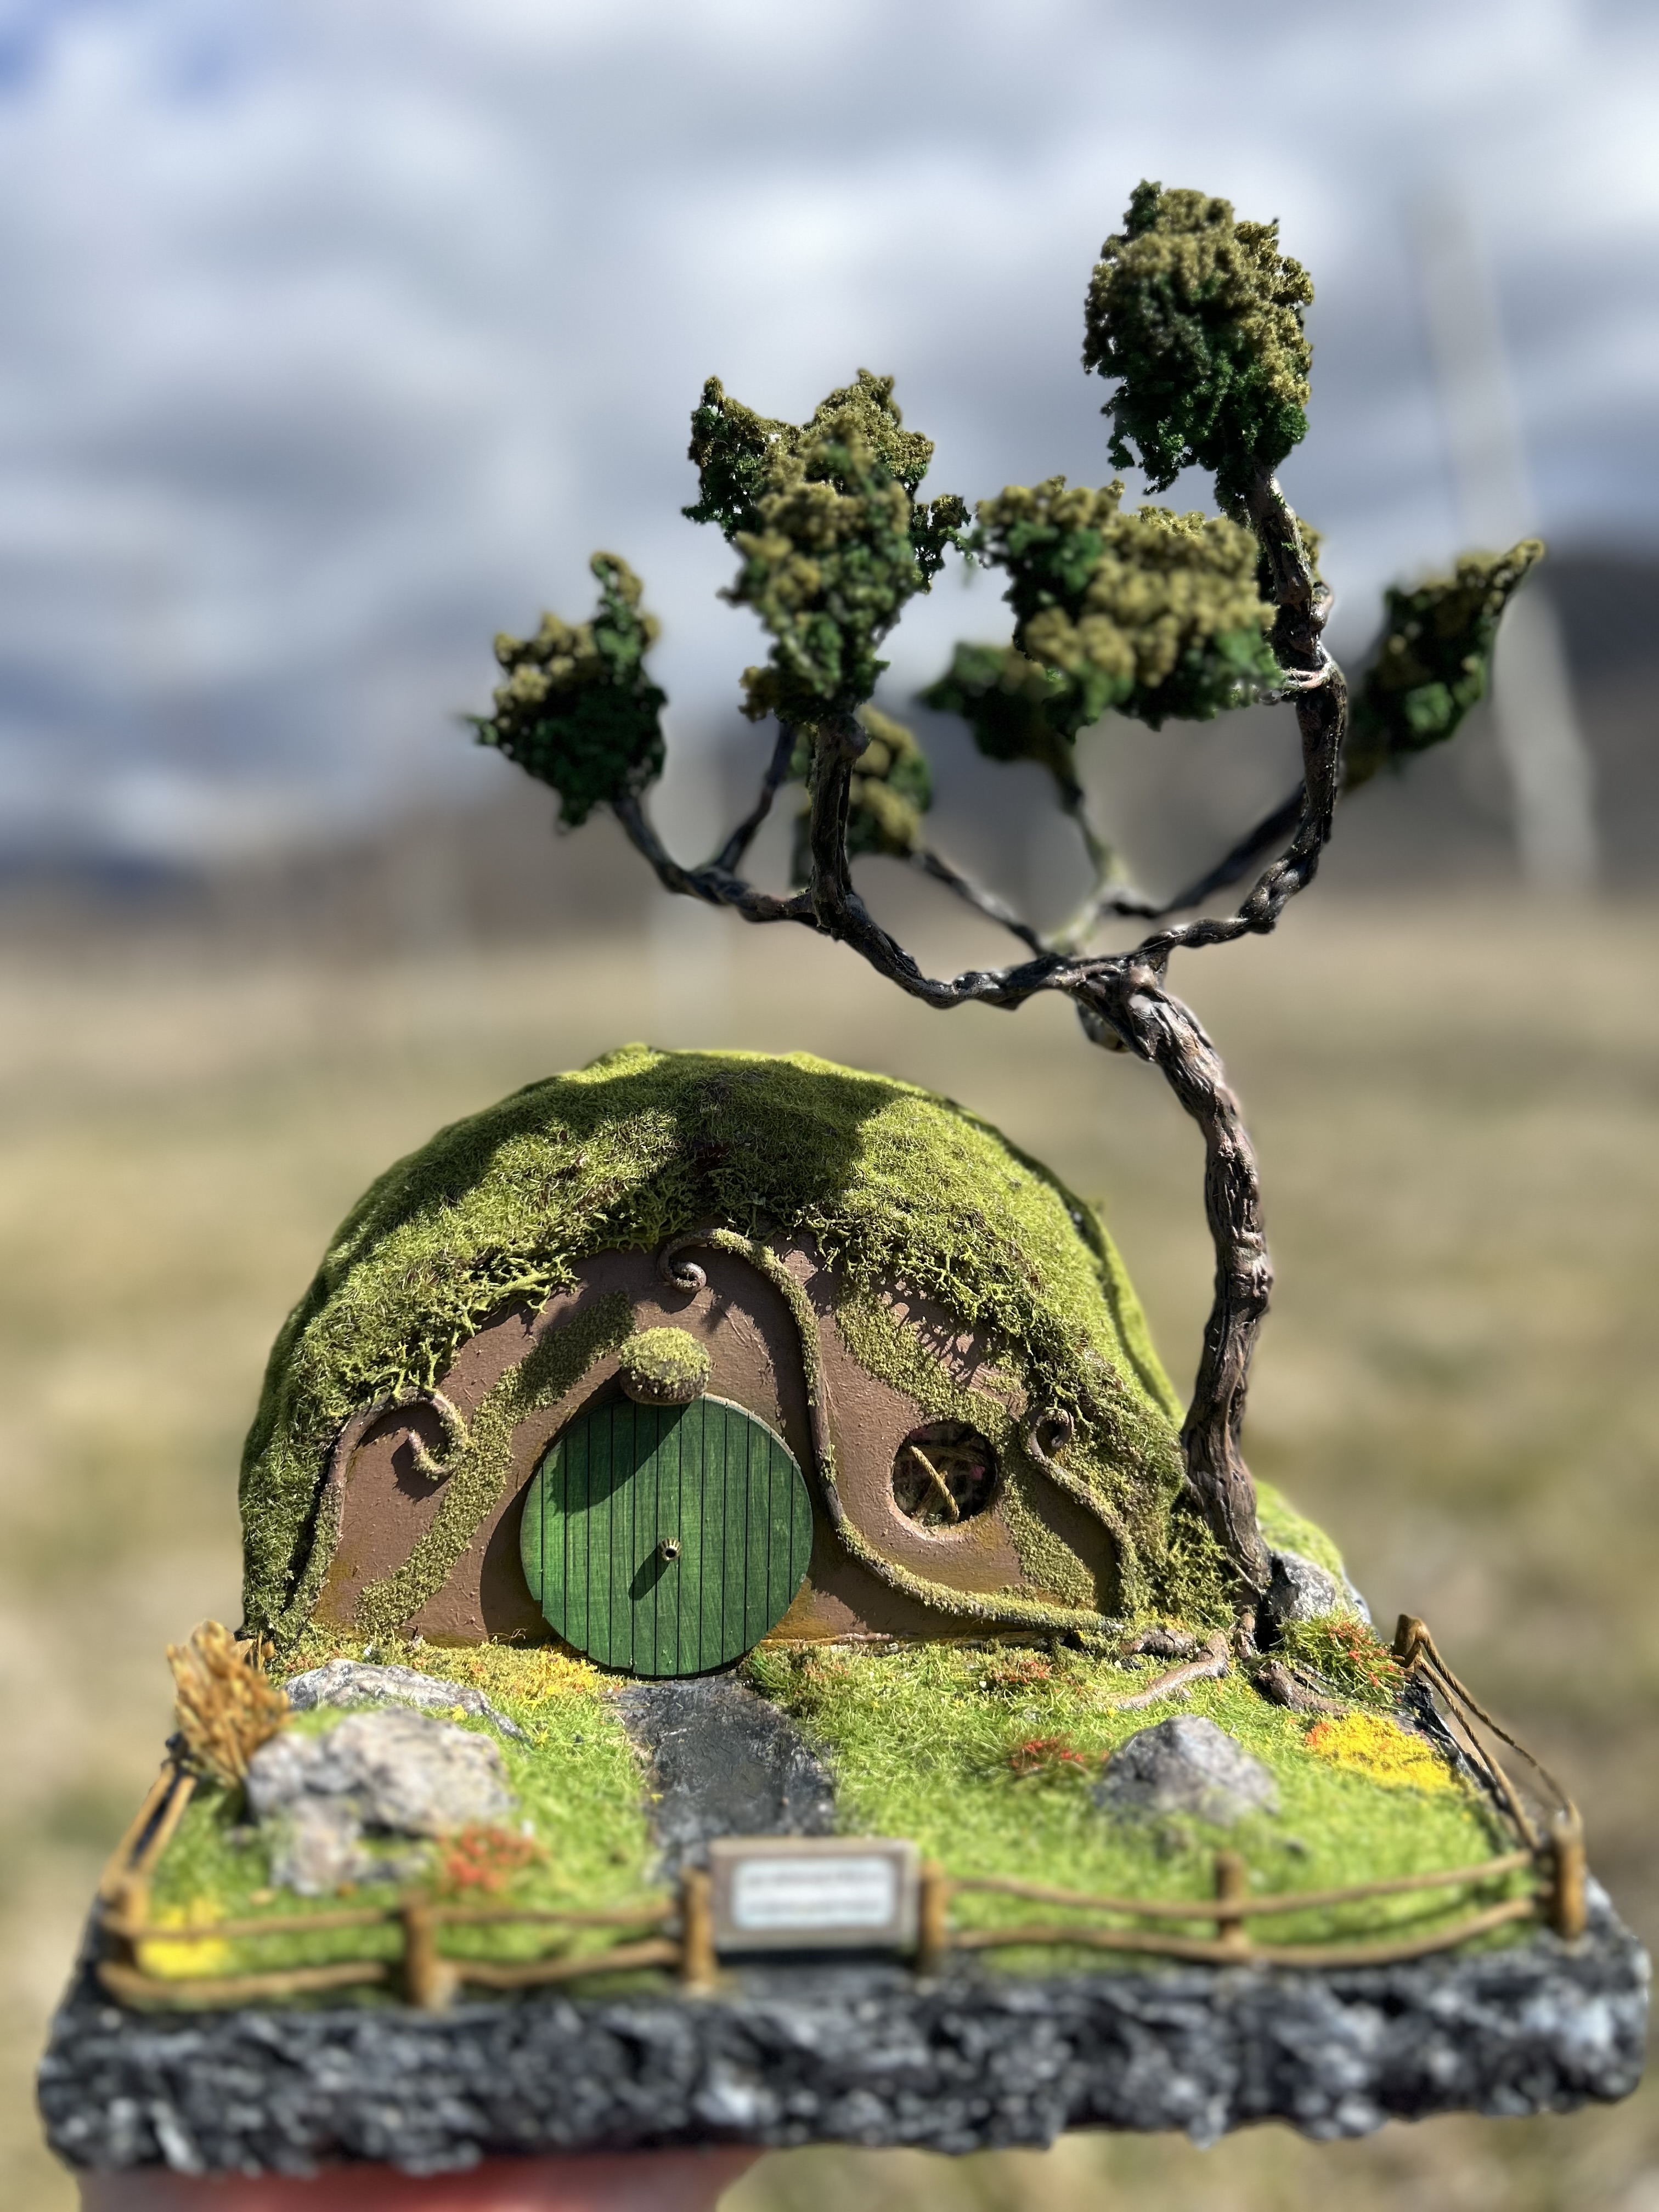 The hobbit house with tree